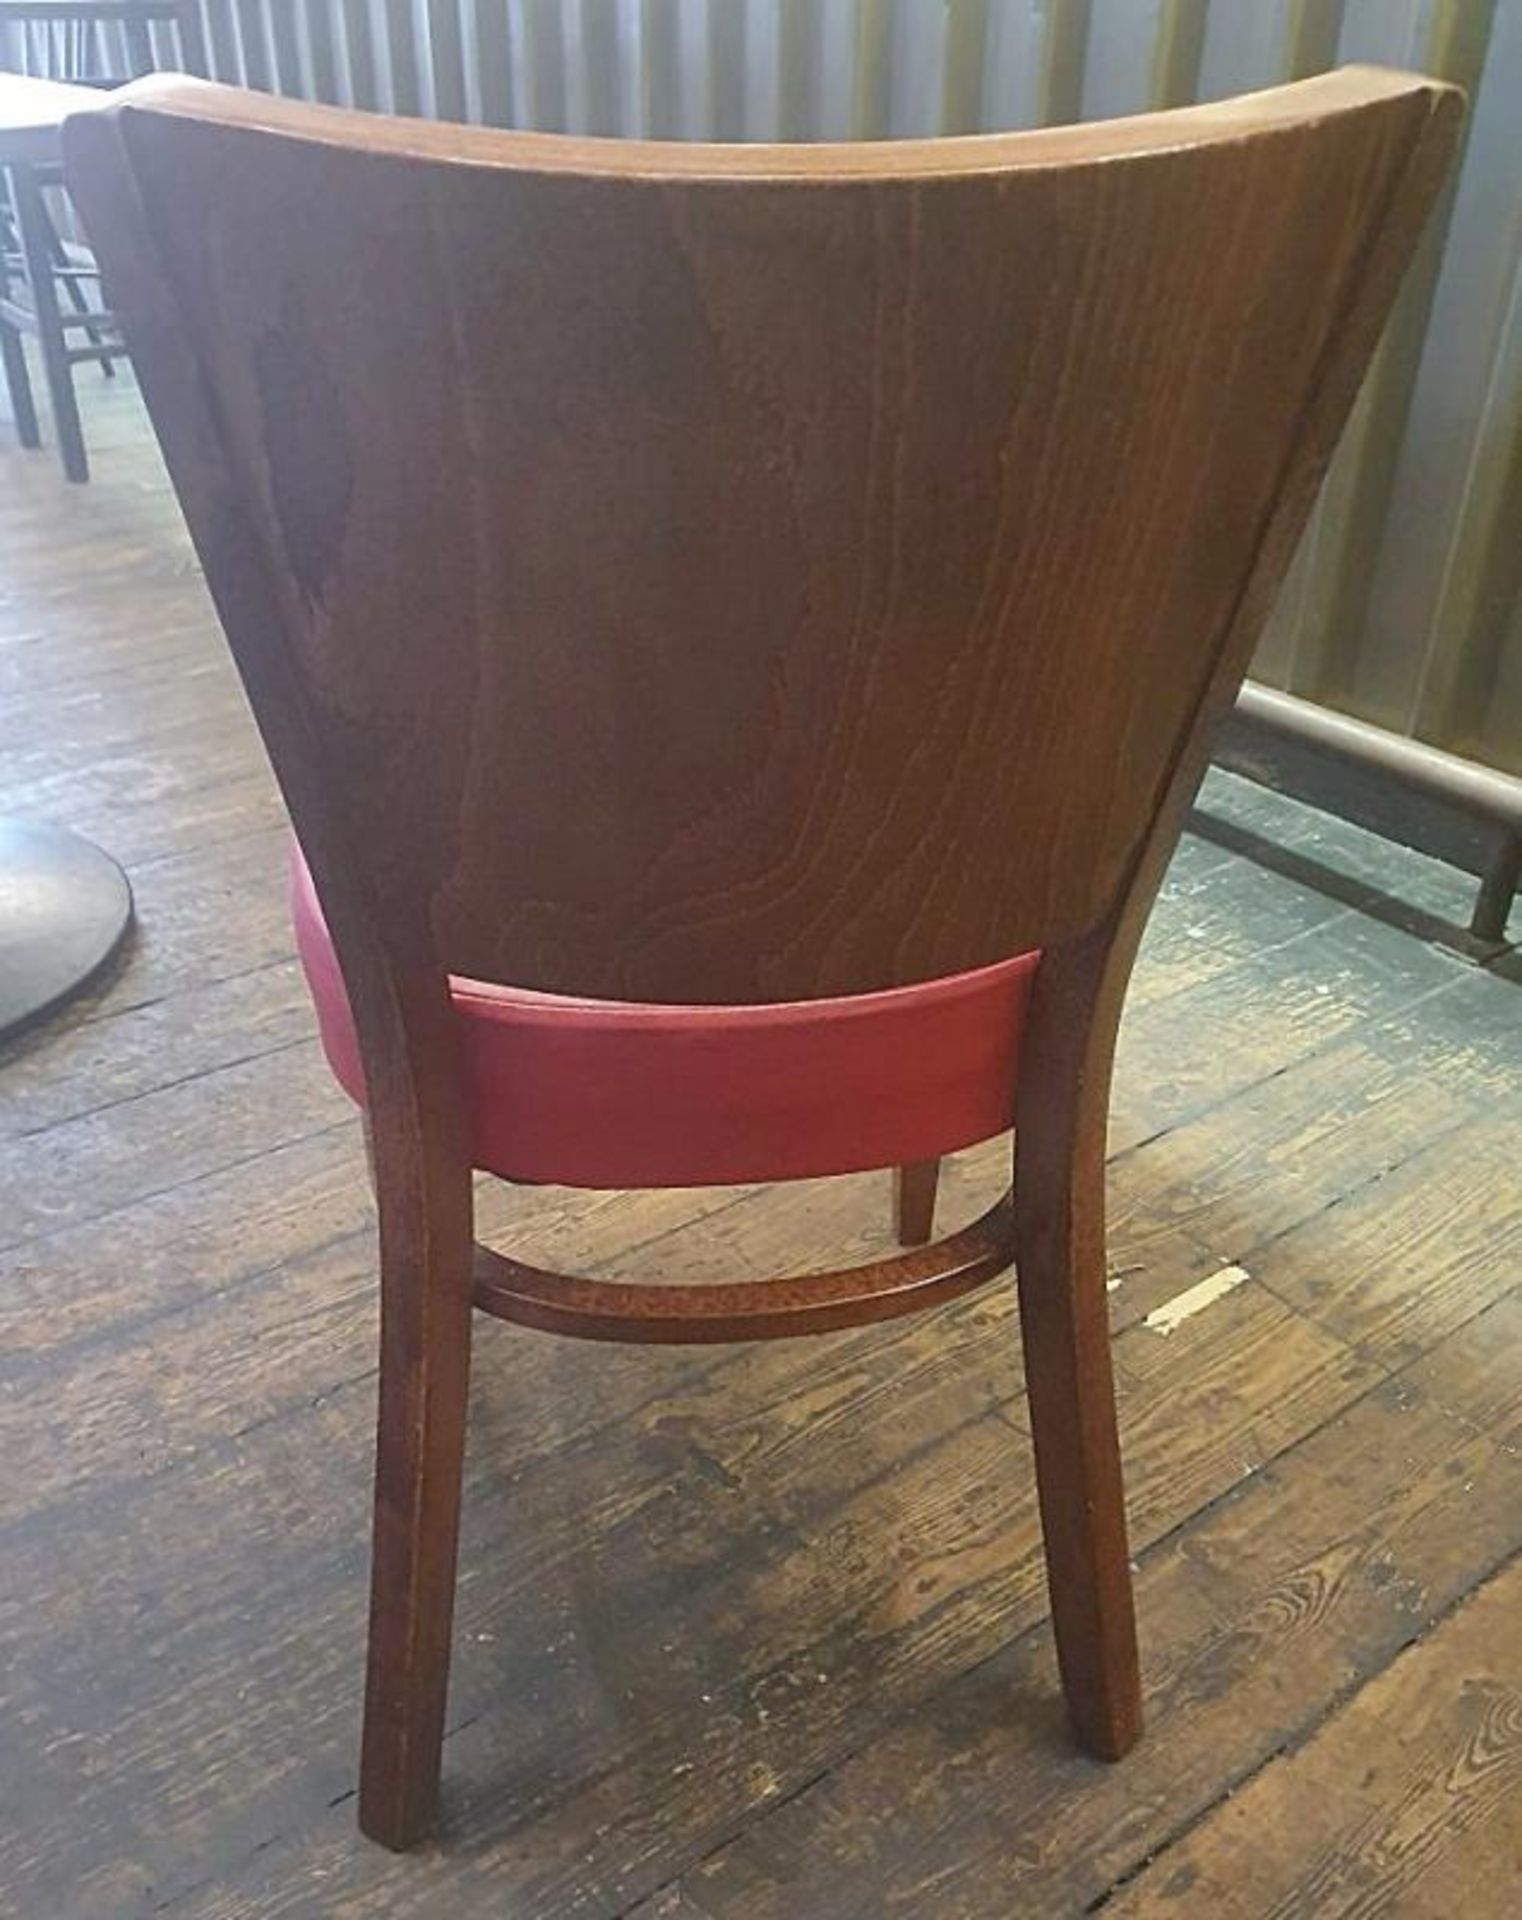 6 x Wooden Dining Chairs With Upholstered Seat Cushions In Red - Recently Taken From A Contemporary - Image 3 of 6